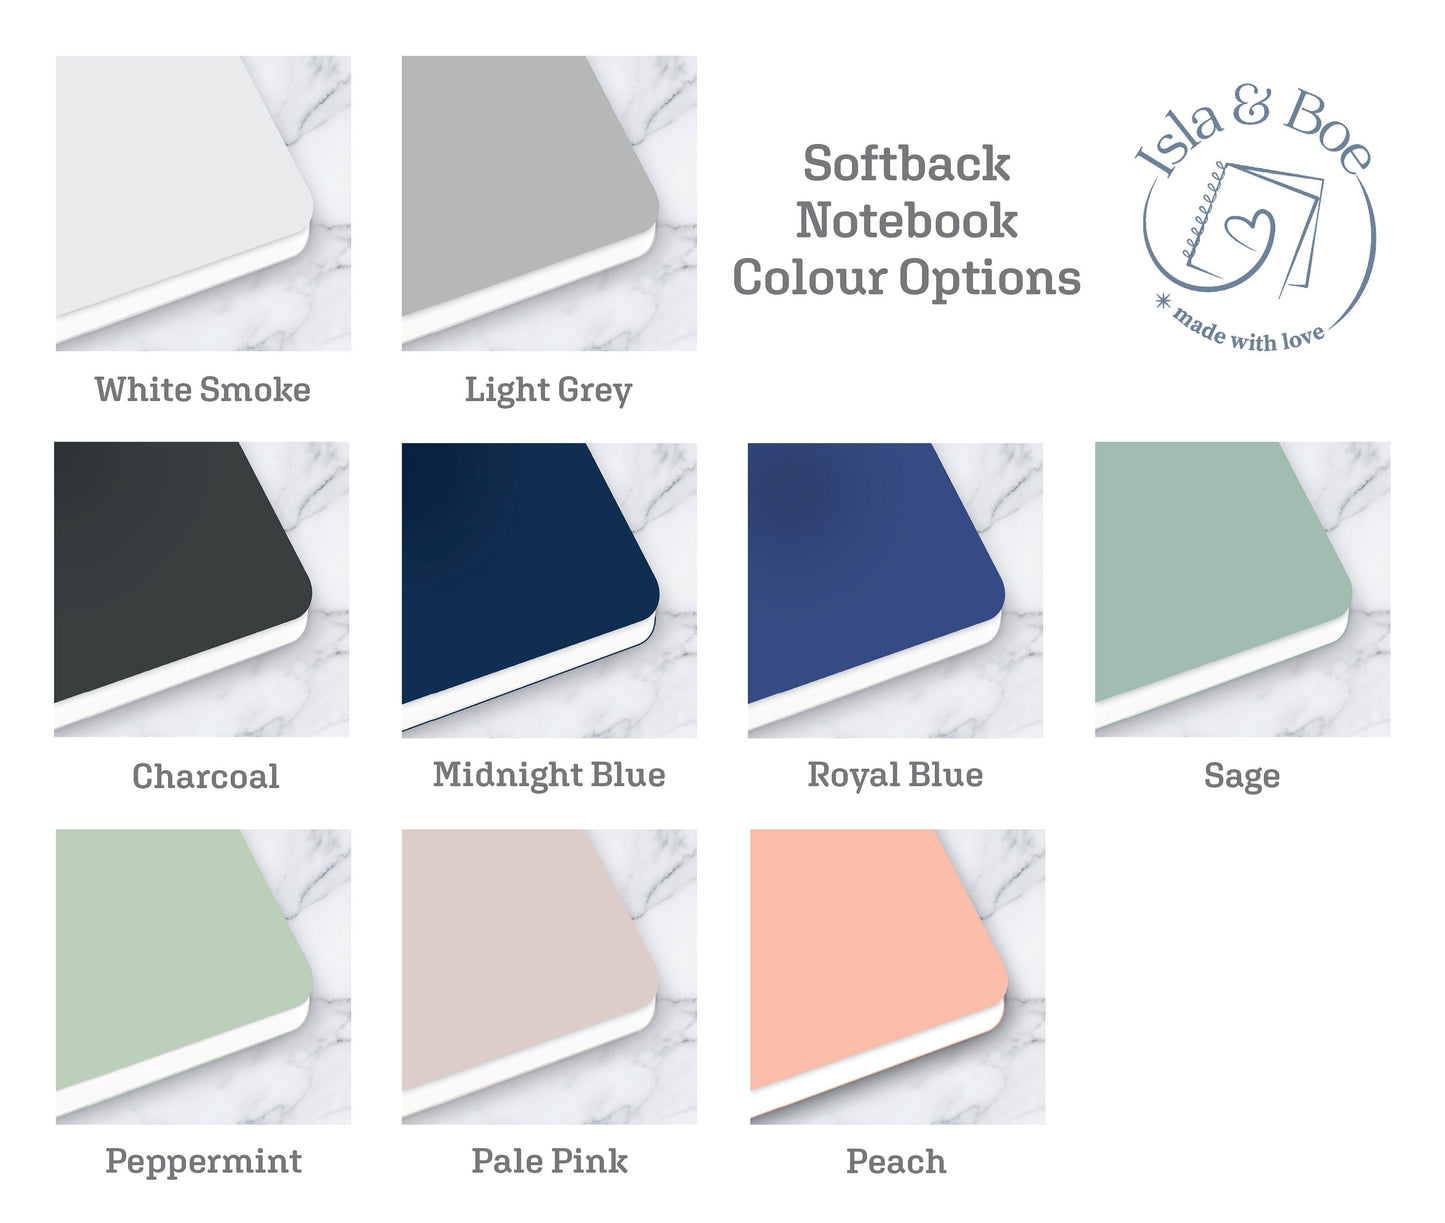 Softback notebook colour swatches, White smoke, Light Grey, Charcoal, Midnight Blue, Sage, Peppermint, Pale Pink, Soft peach